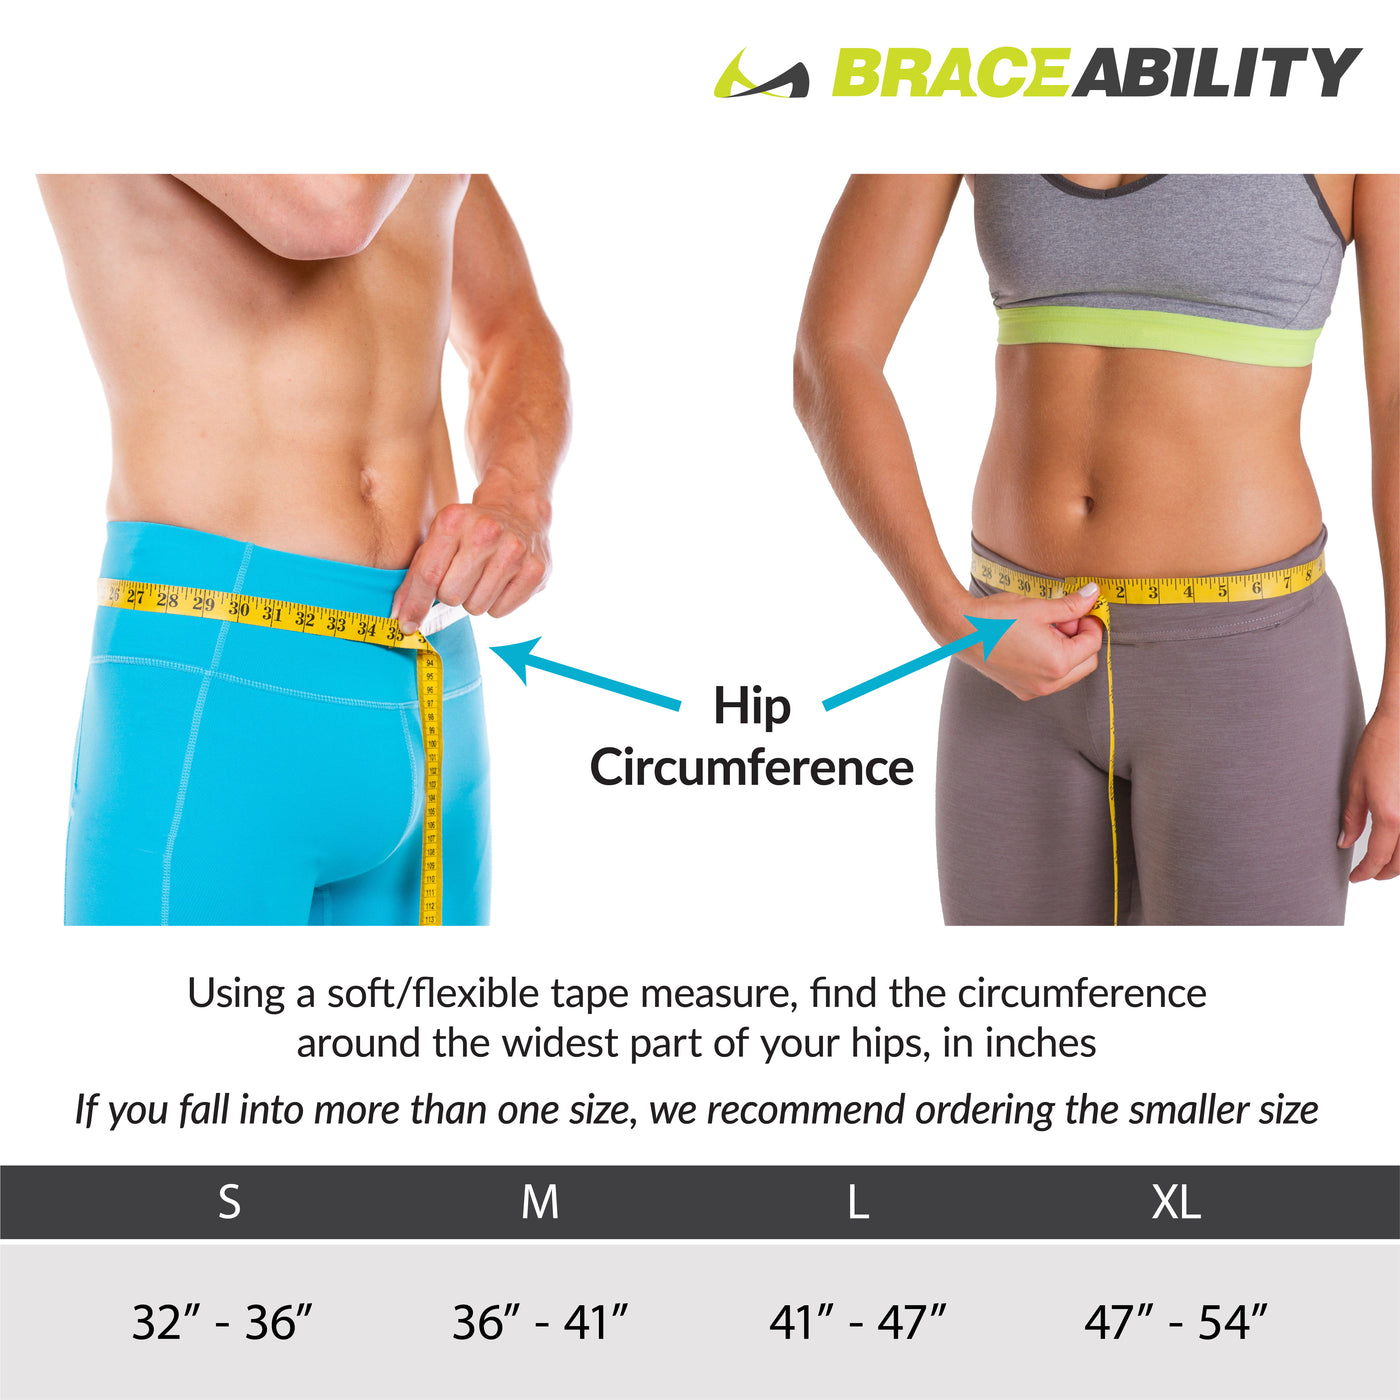 The inguinal hernia belt sizing chart comes in sizes s-xl fitting 32 inch to 54 inch hip circumferences